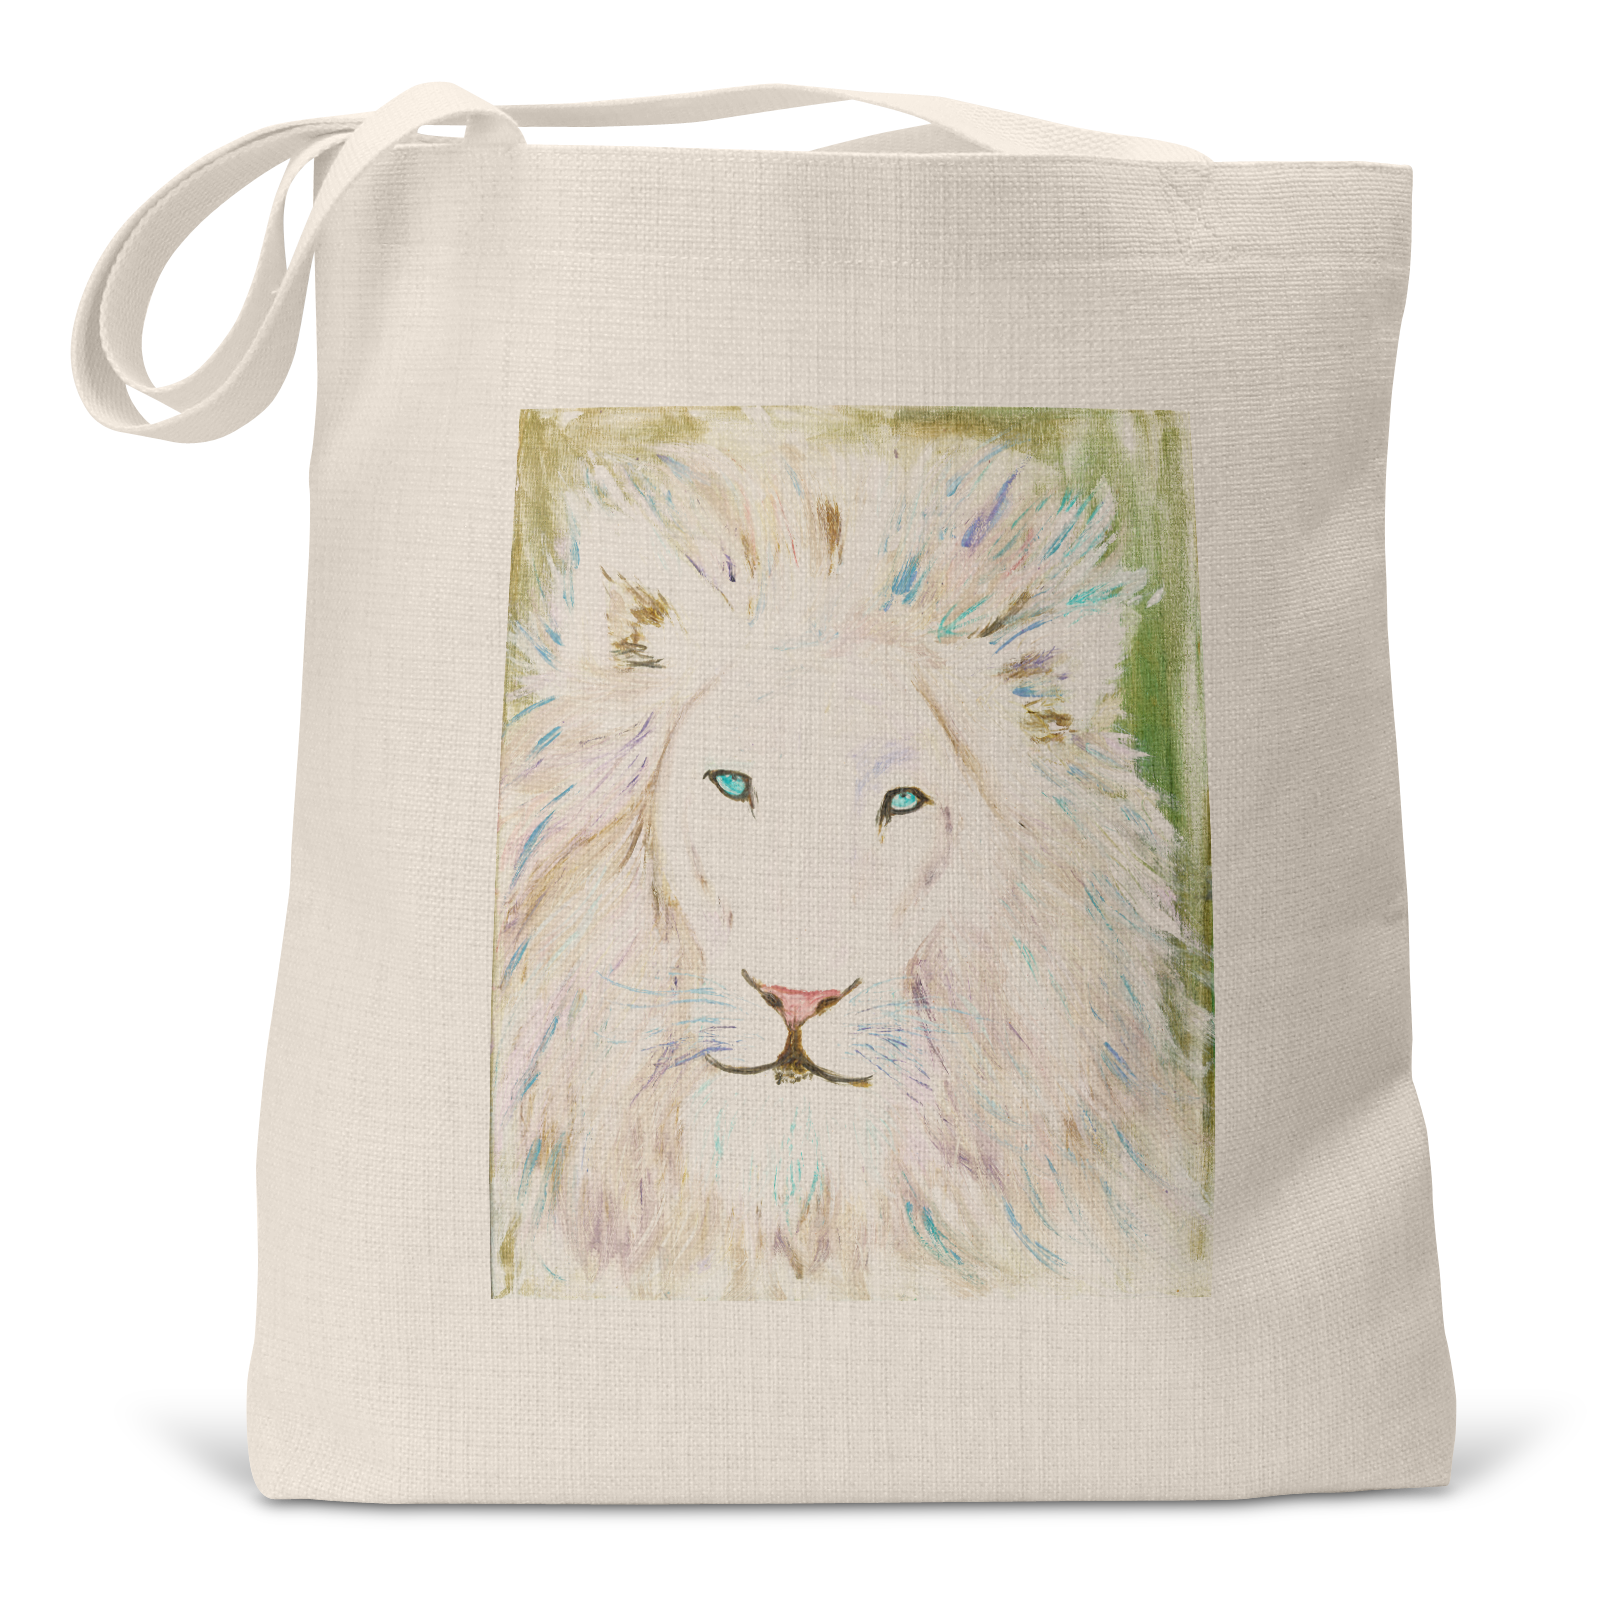 "Whimsical White Lion" - Small Tote